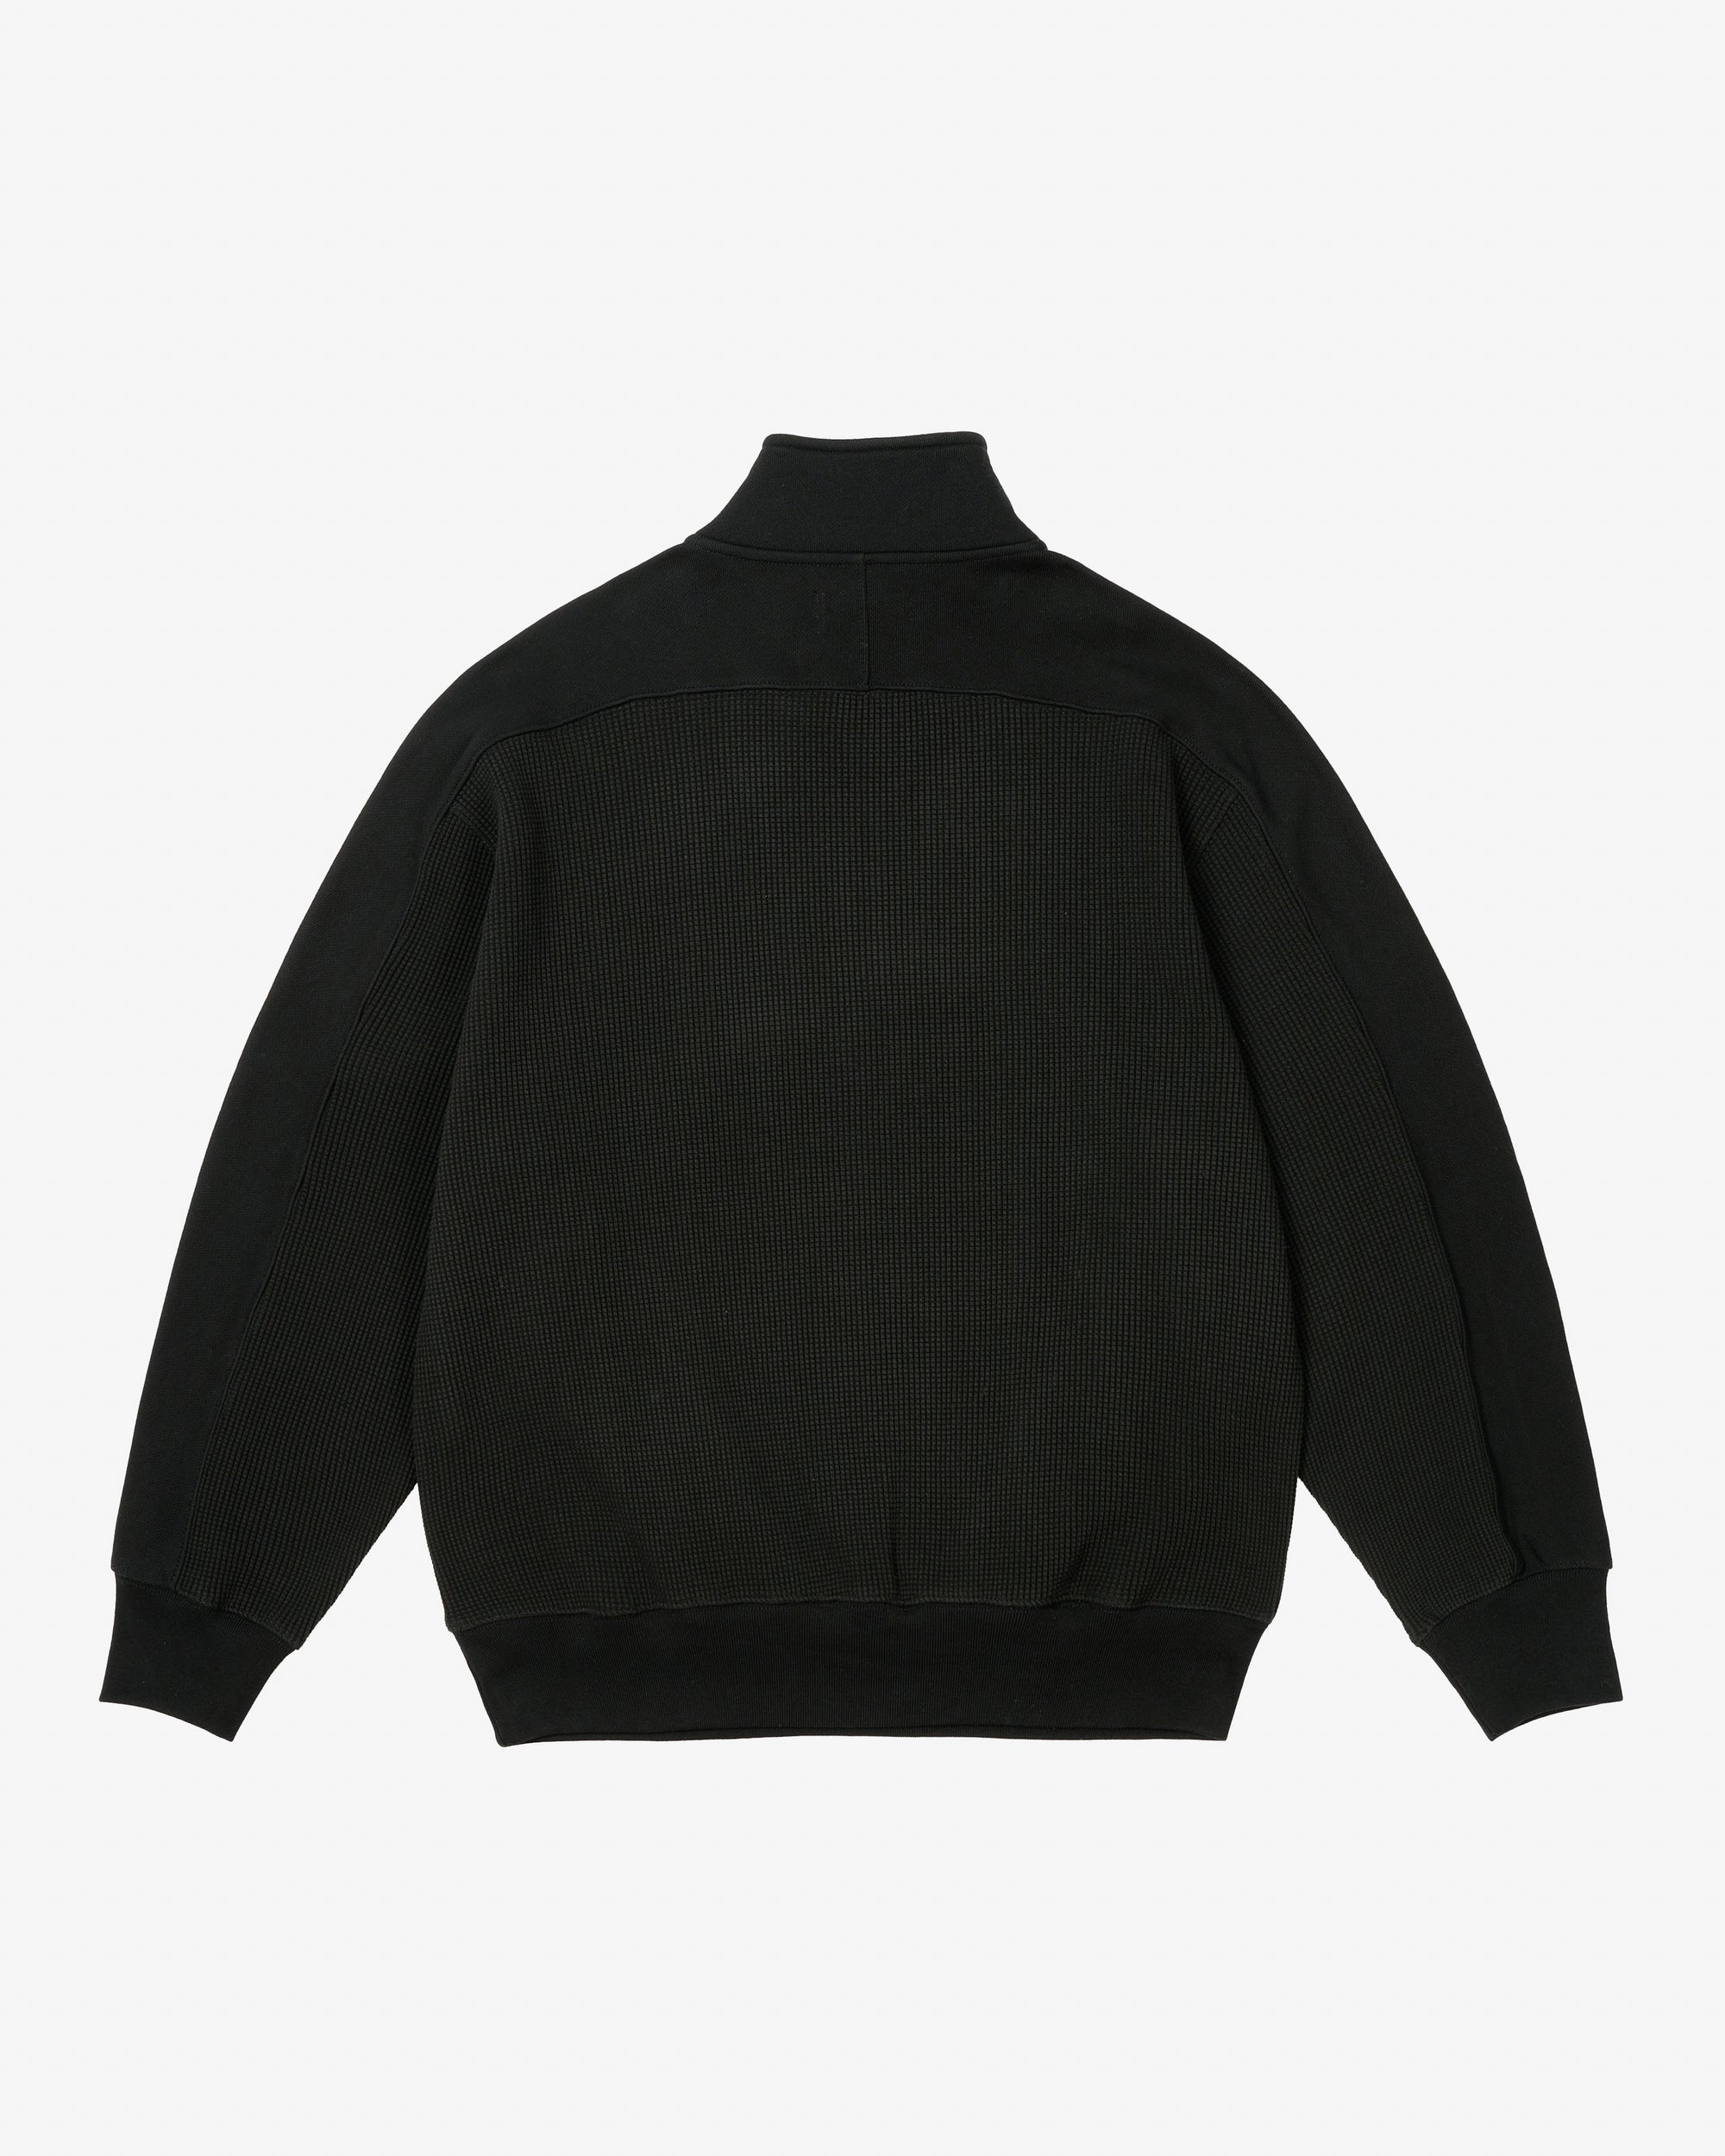 Palace - Men's Waffle On 1/4 Zip - (Black) view 2